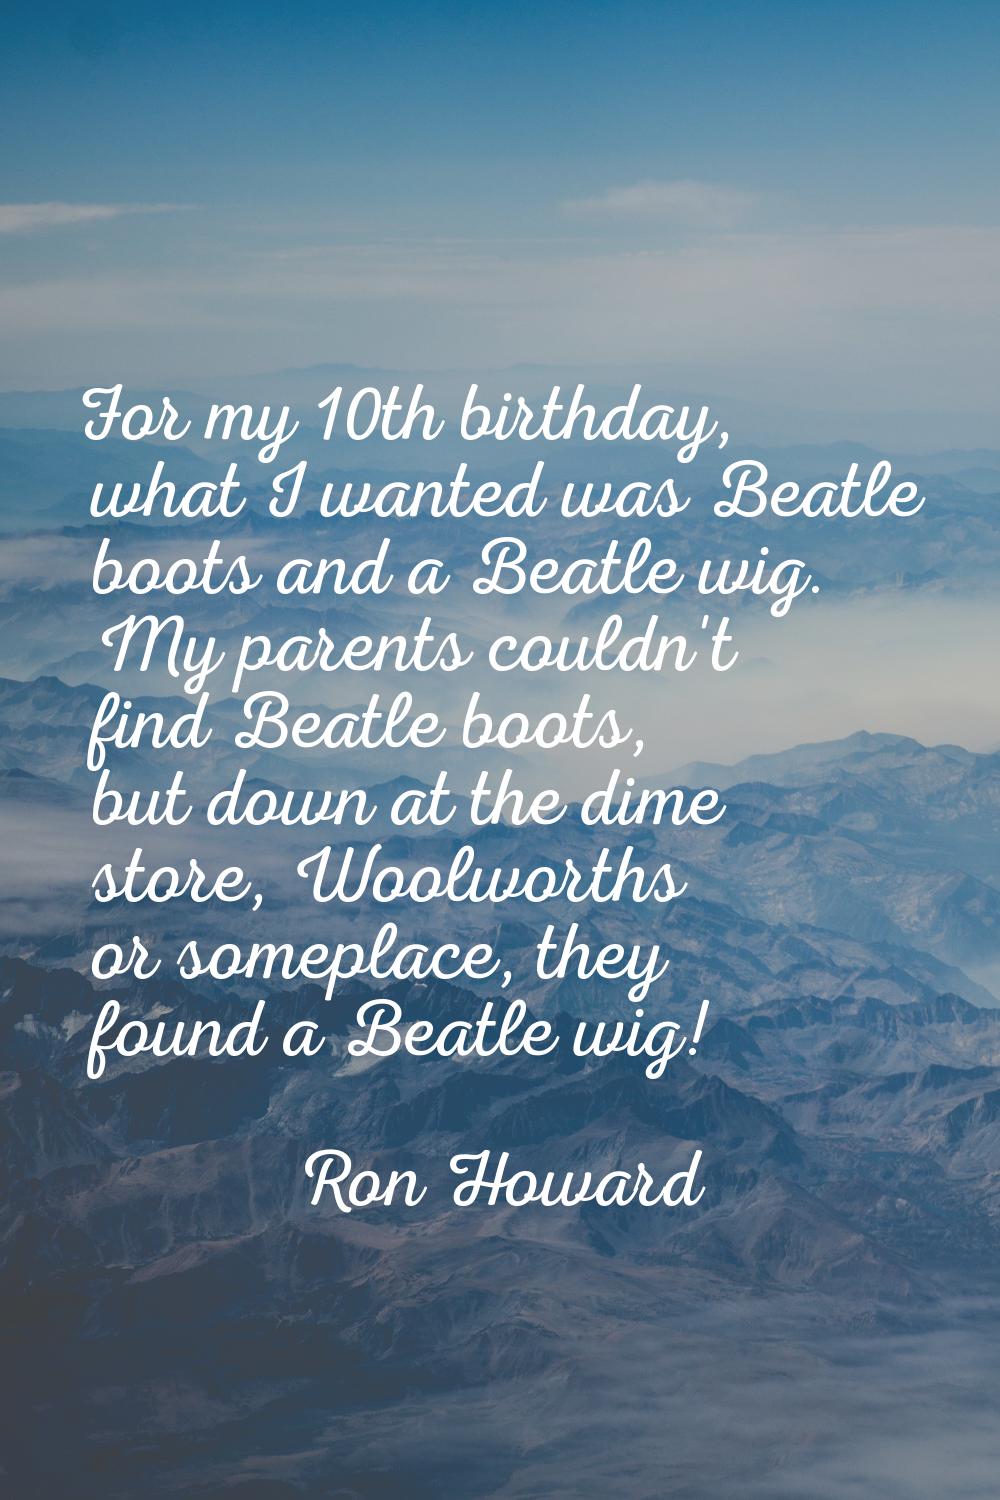 For my 10th birthday, what I wanted was Beatle boots and a Beatle wig. My parents couldn't find Bea